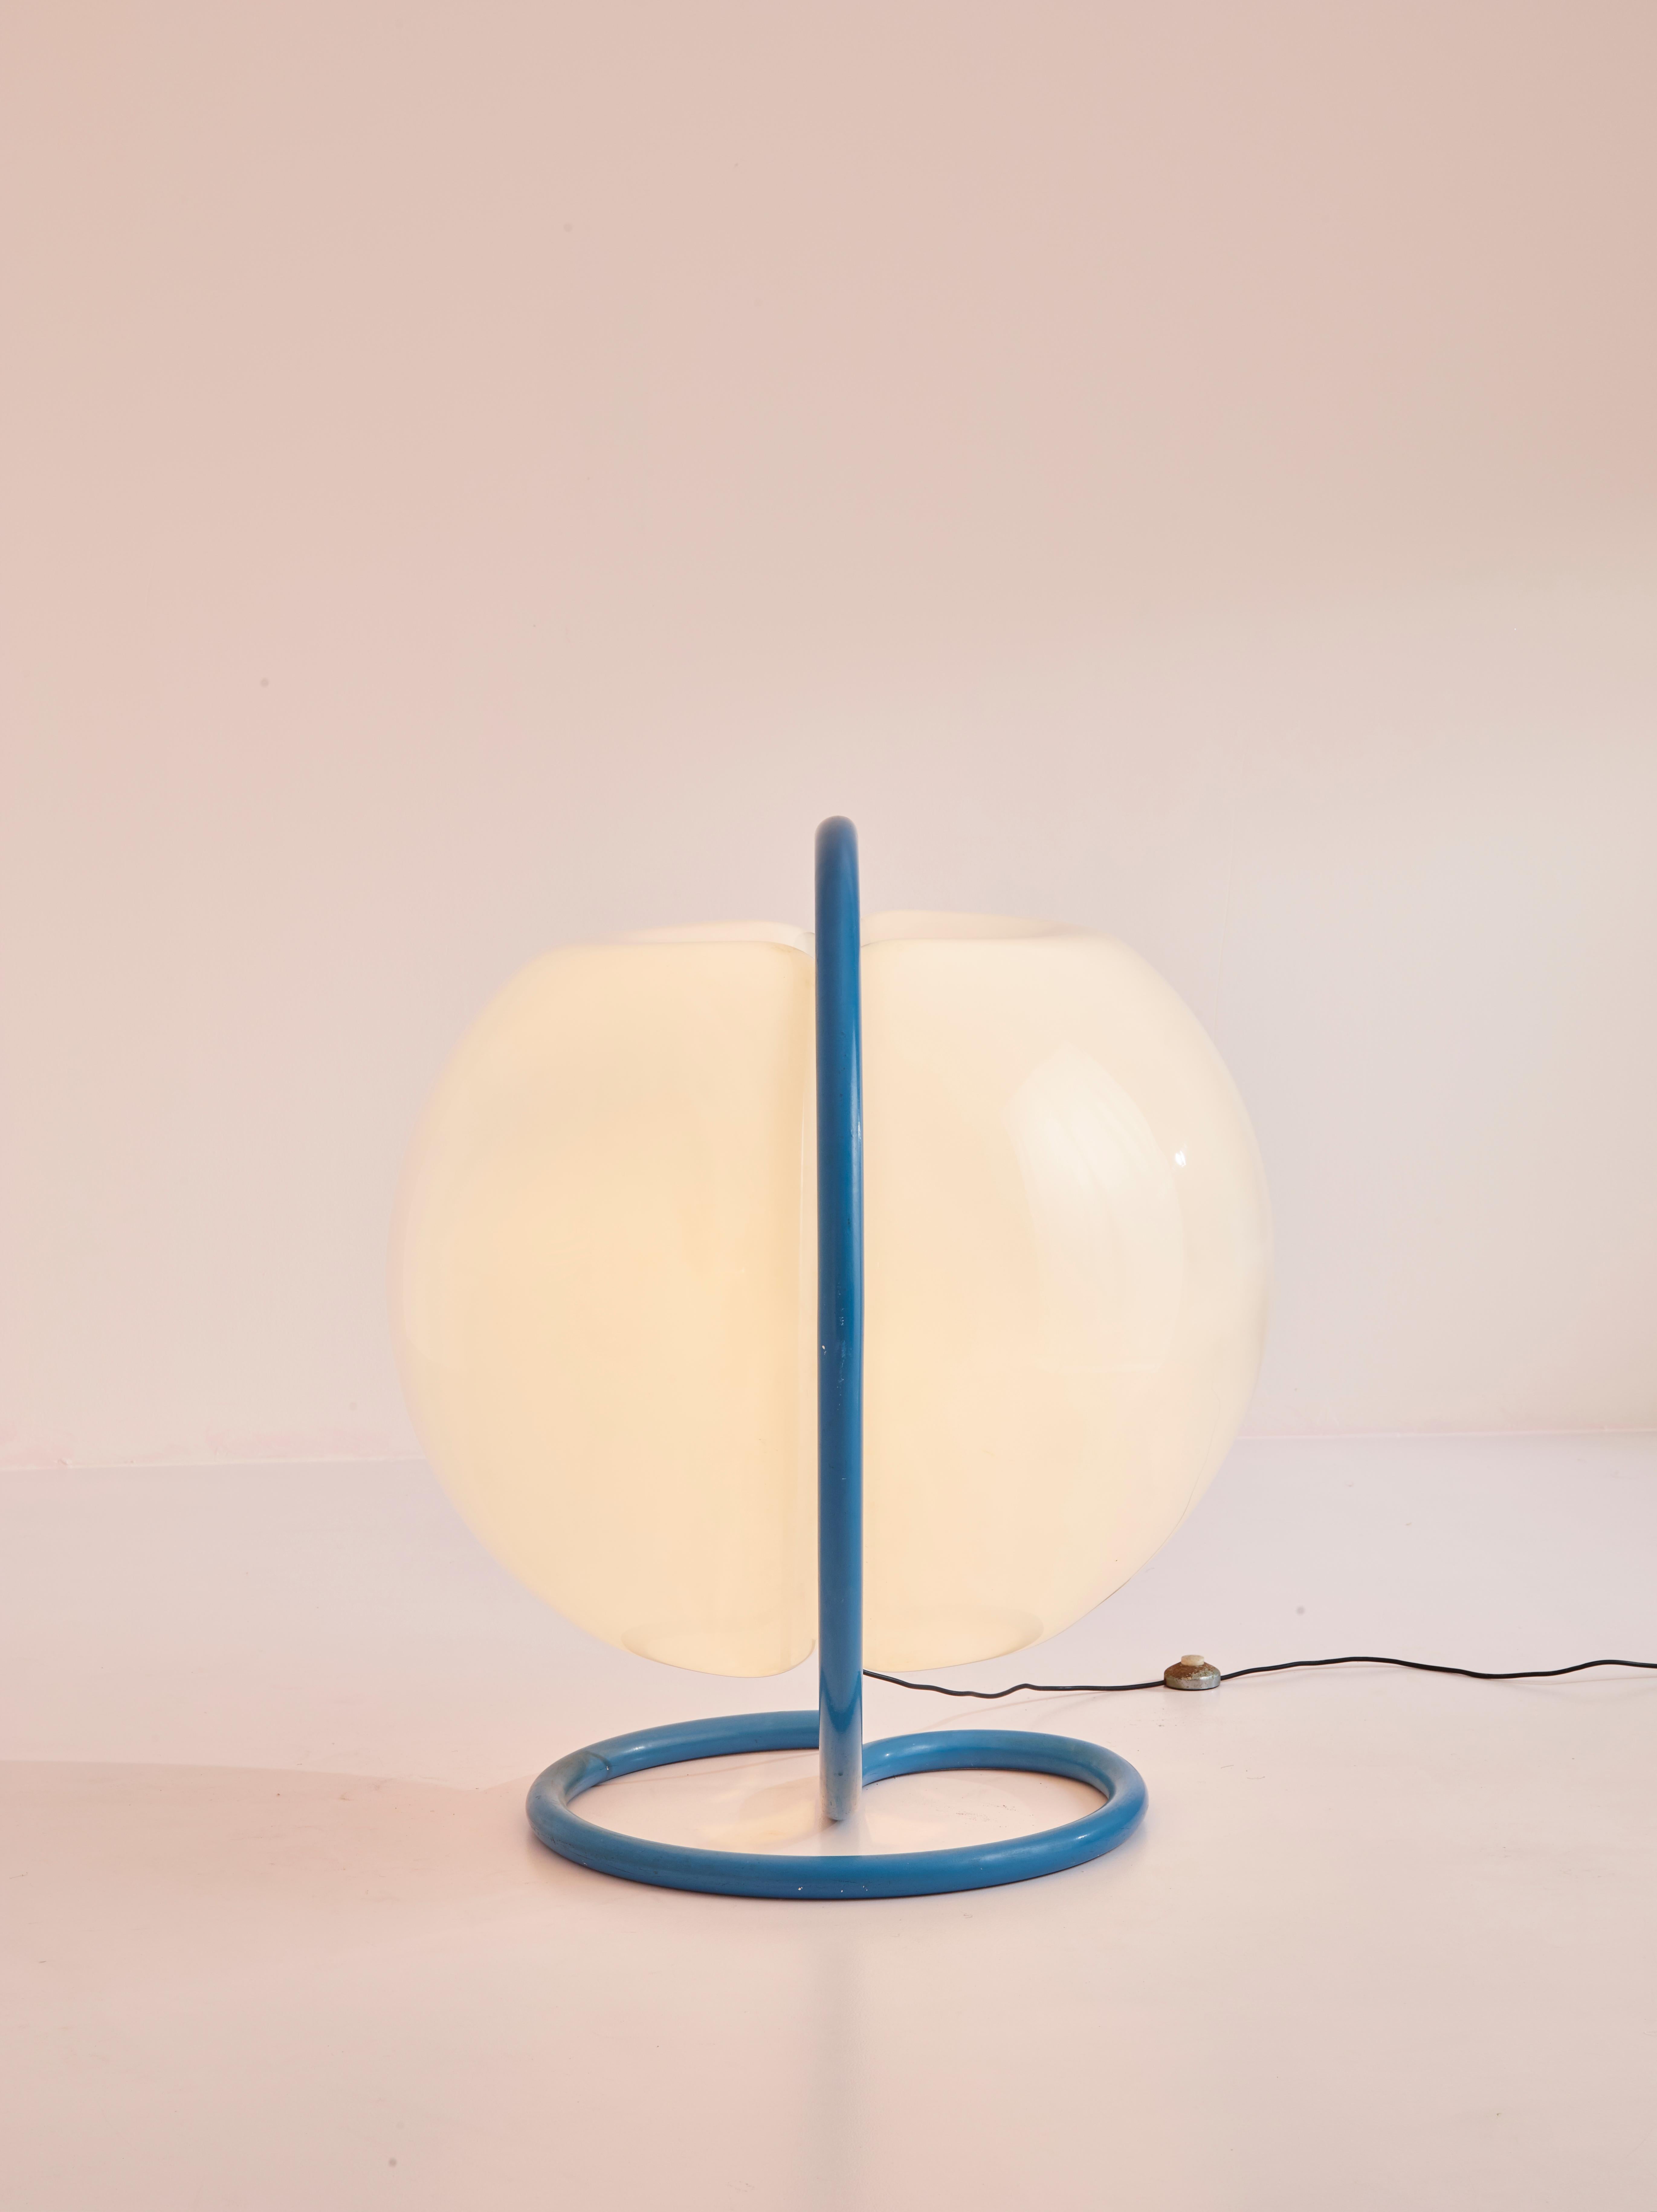 Mid-20th Century Elio Martinelli floor lamp model 'The Map' manufactured by Martinelli Luce, 1968